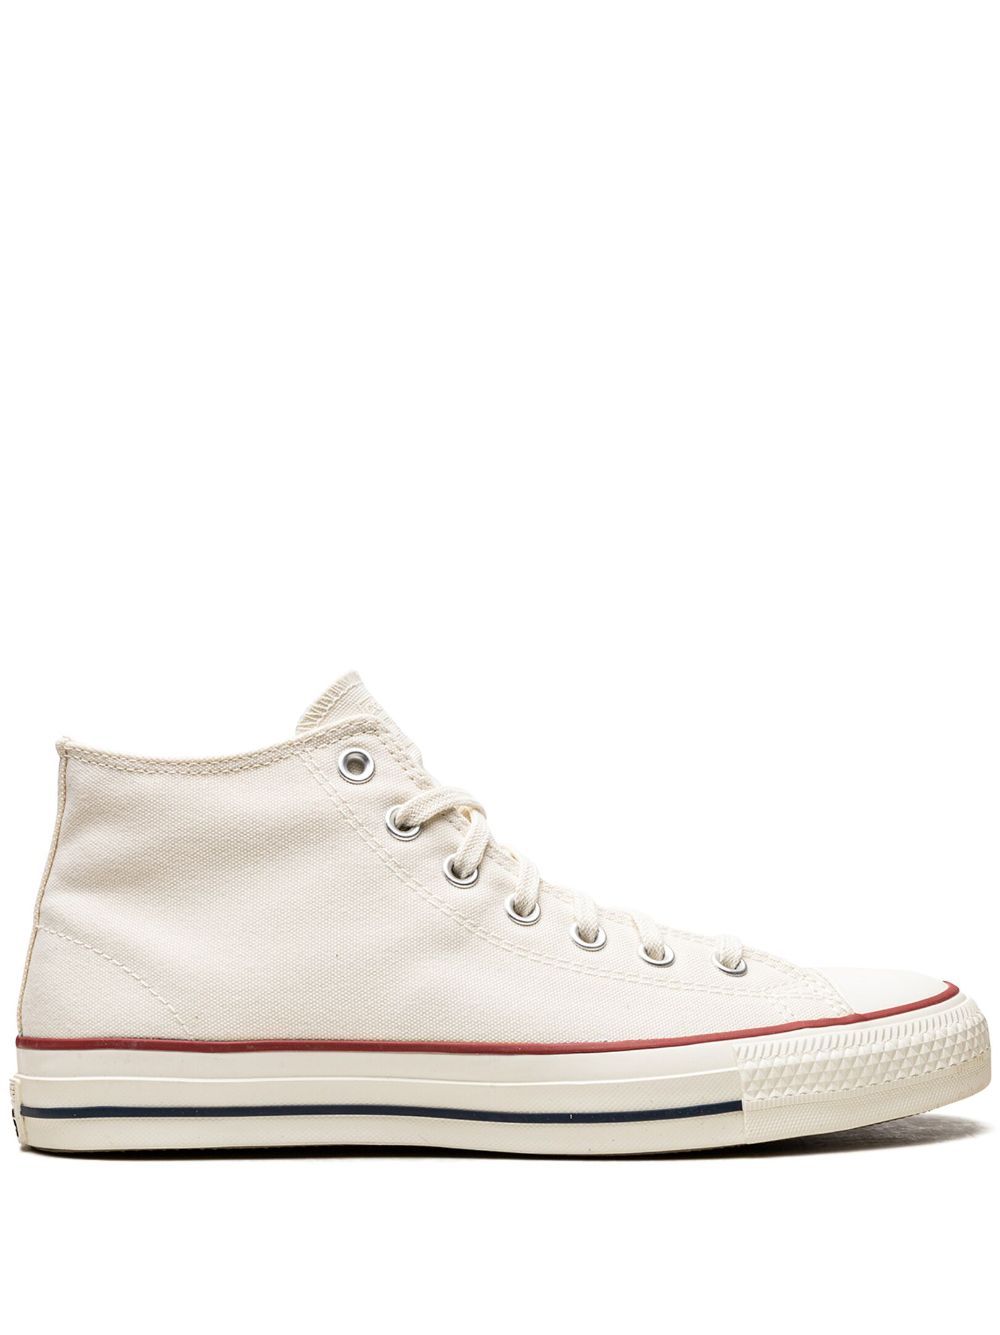 Converse Chuck 70 Hi Canvas Sneakers In Parchment-white